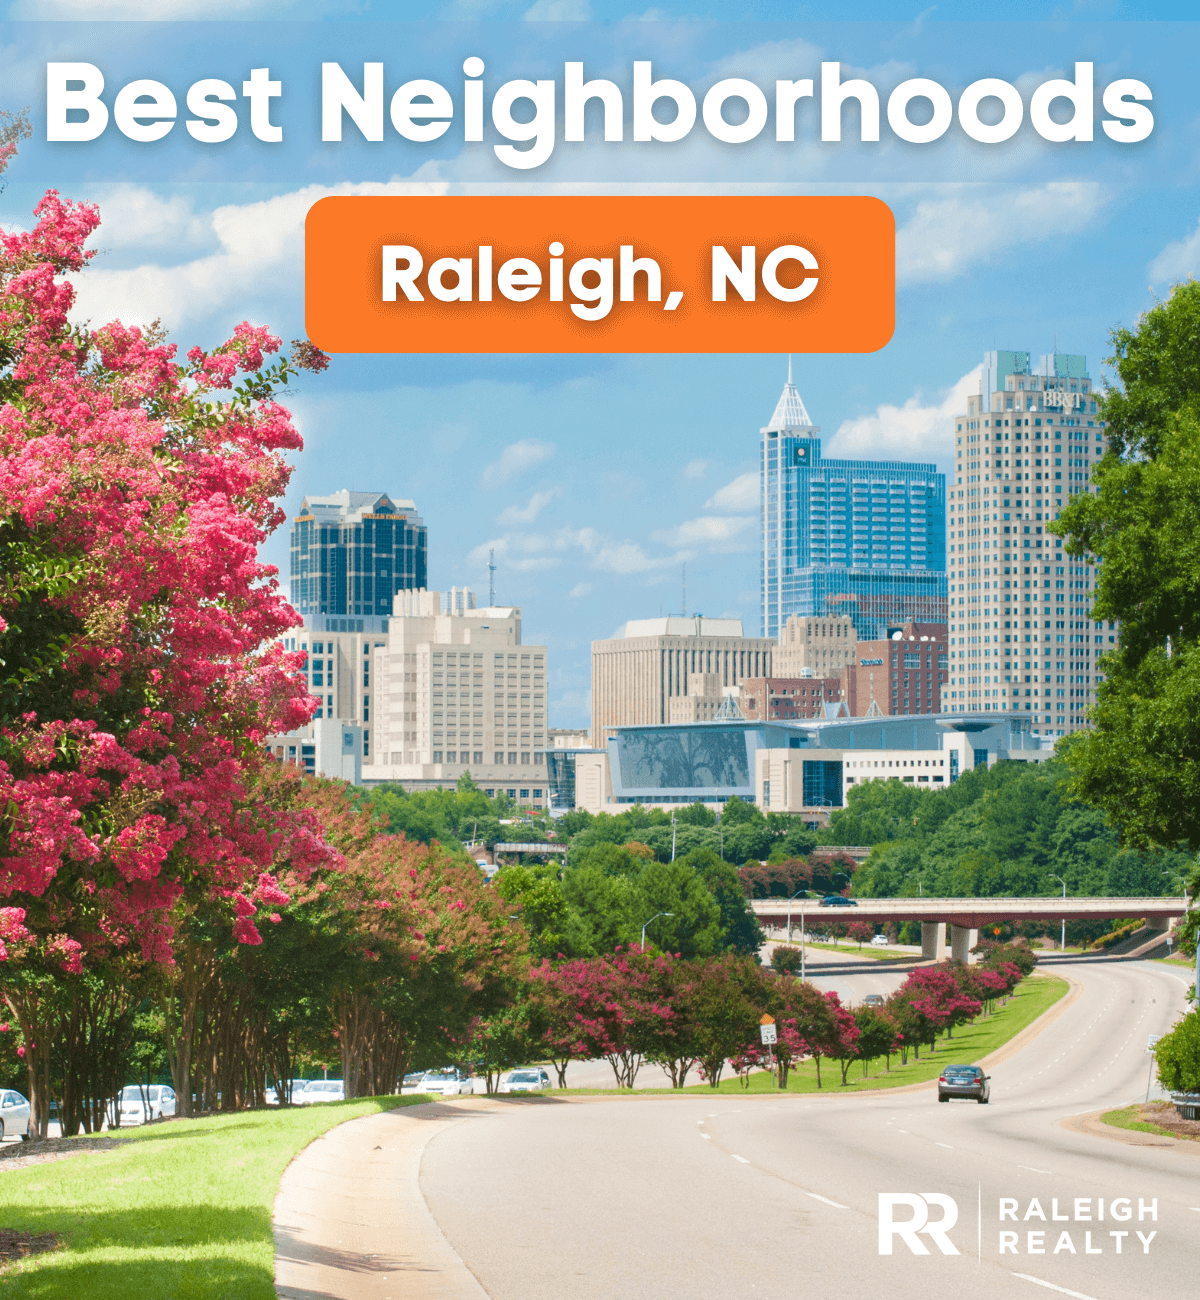 Best Neighborhoods in Raleigh, NC - What are the Best Neighborhoods in Raleigh?